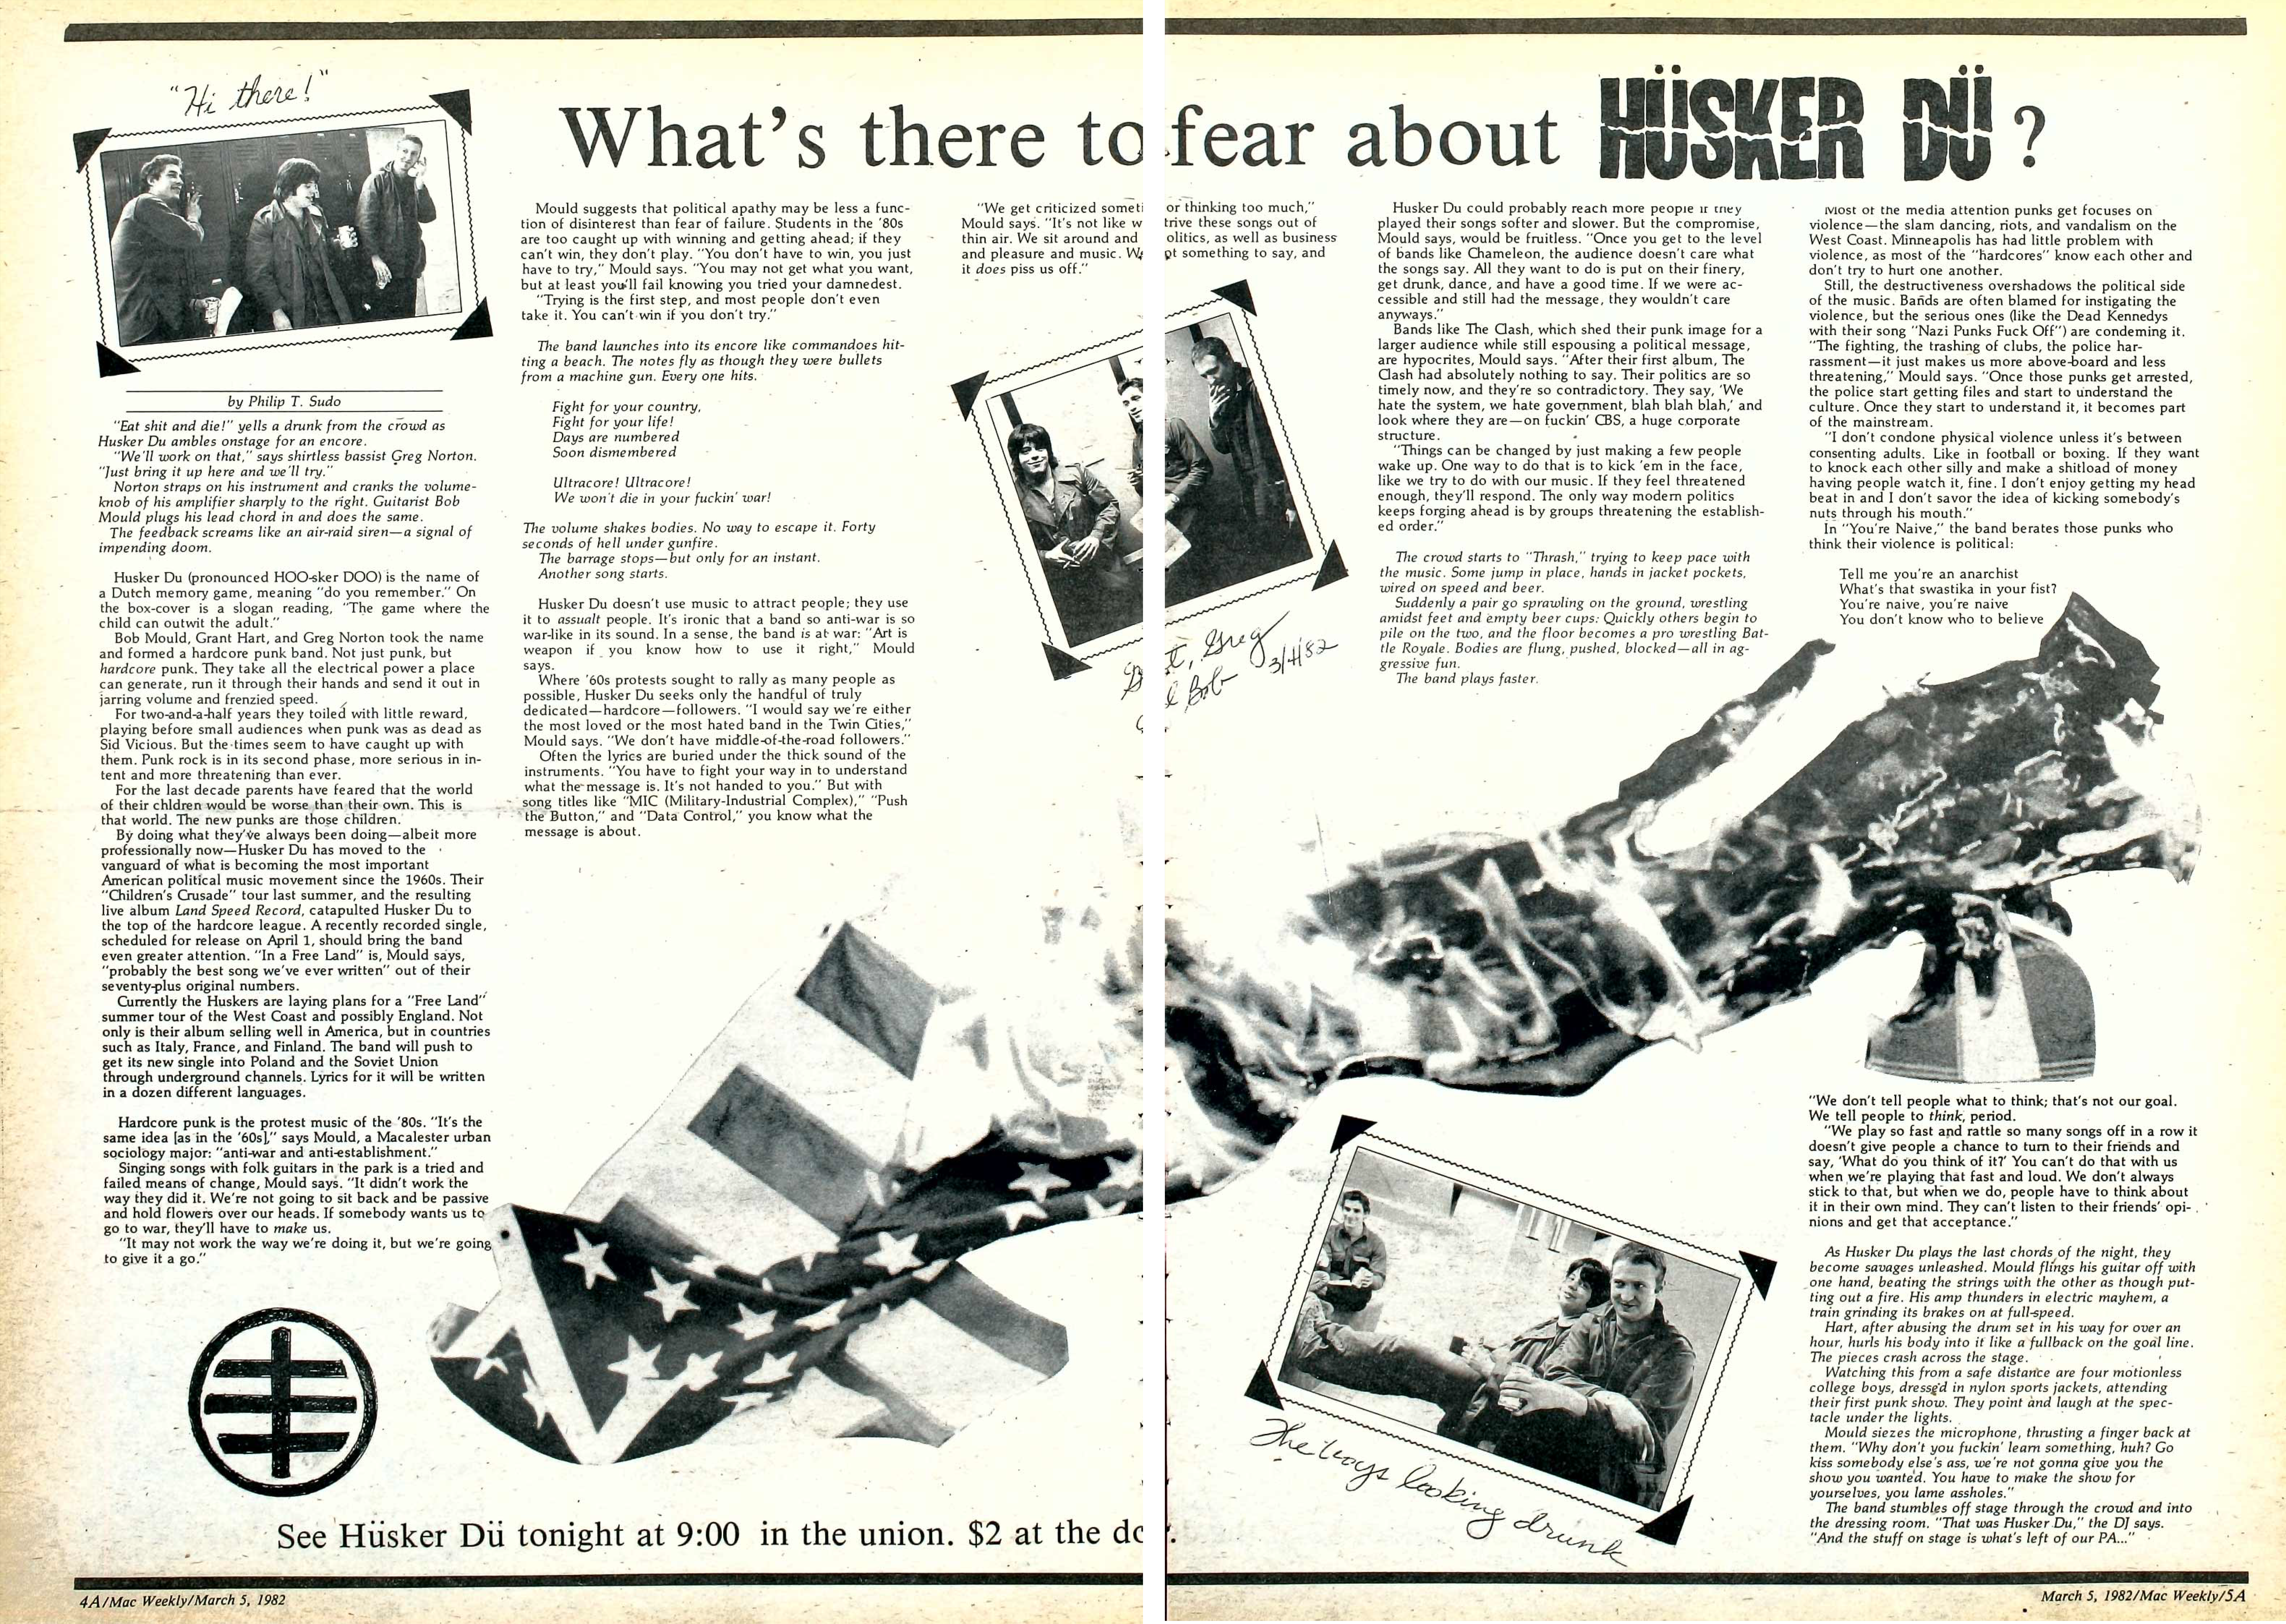 The Mac Weekly, March 5, 1982. What's to Fear About Husker Du?